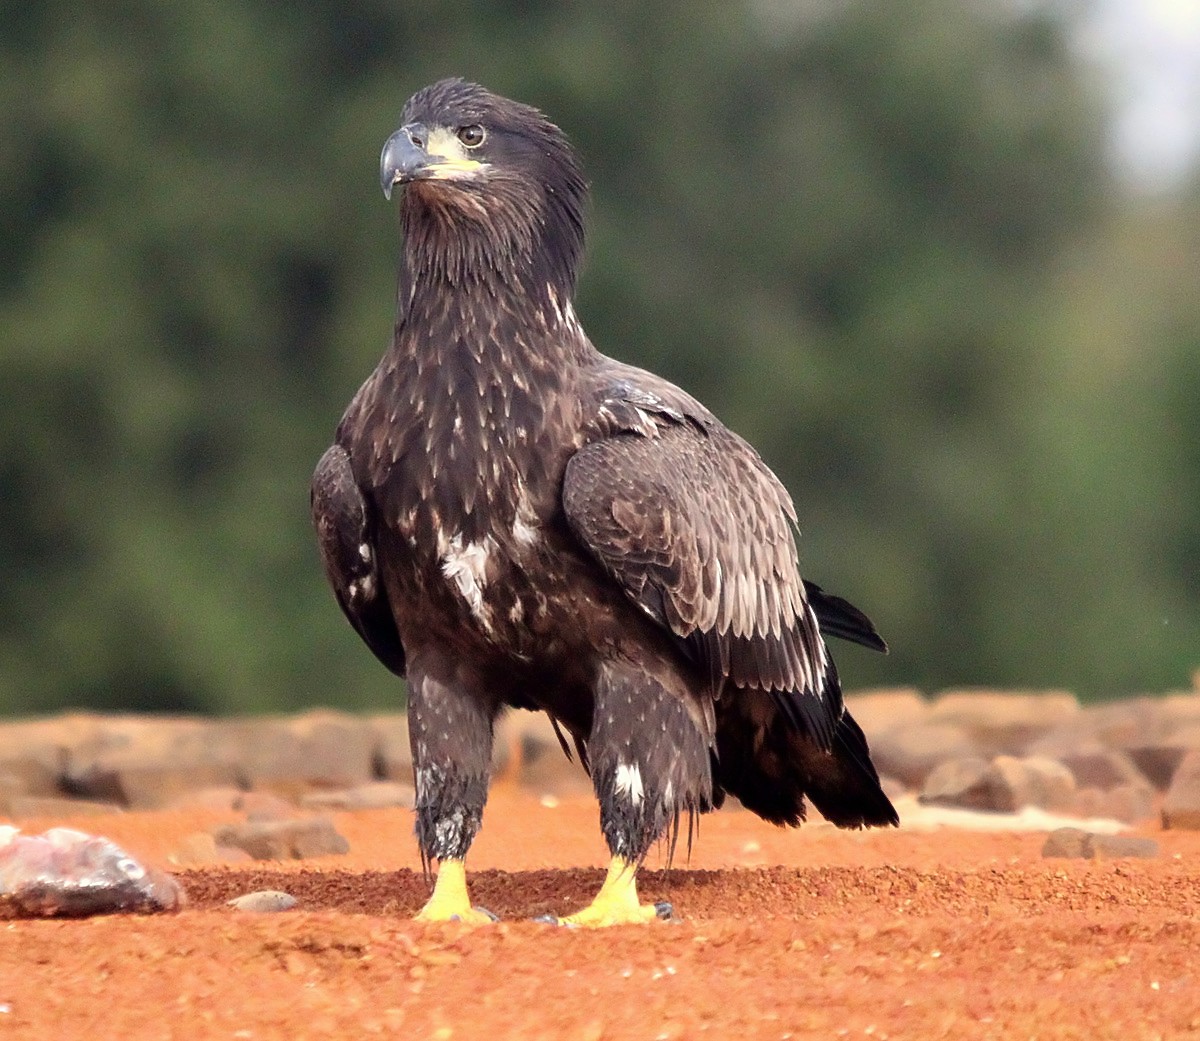 A YOUNG EAGLE